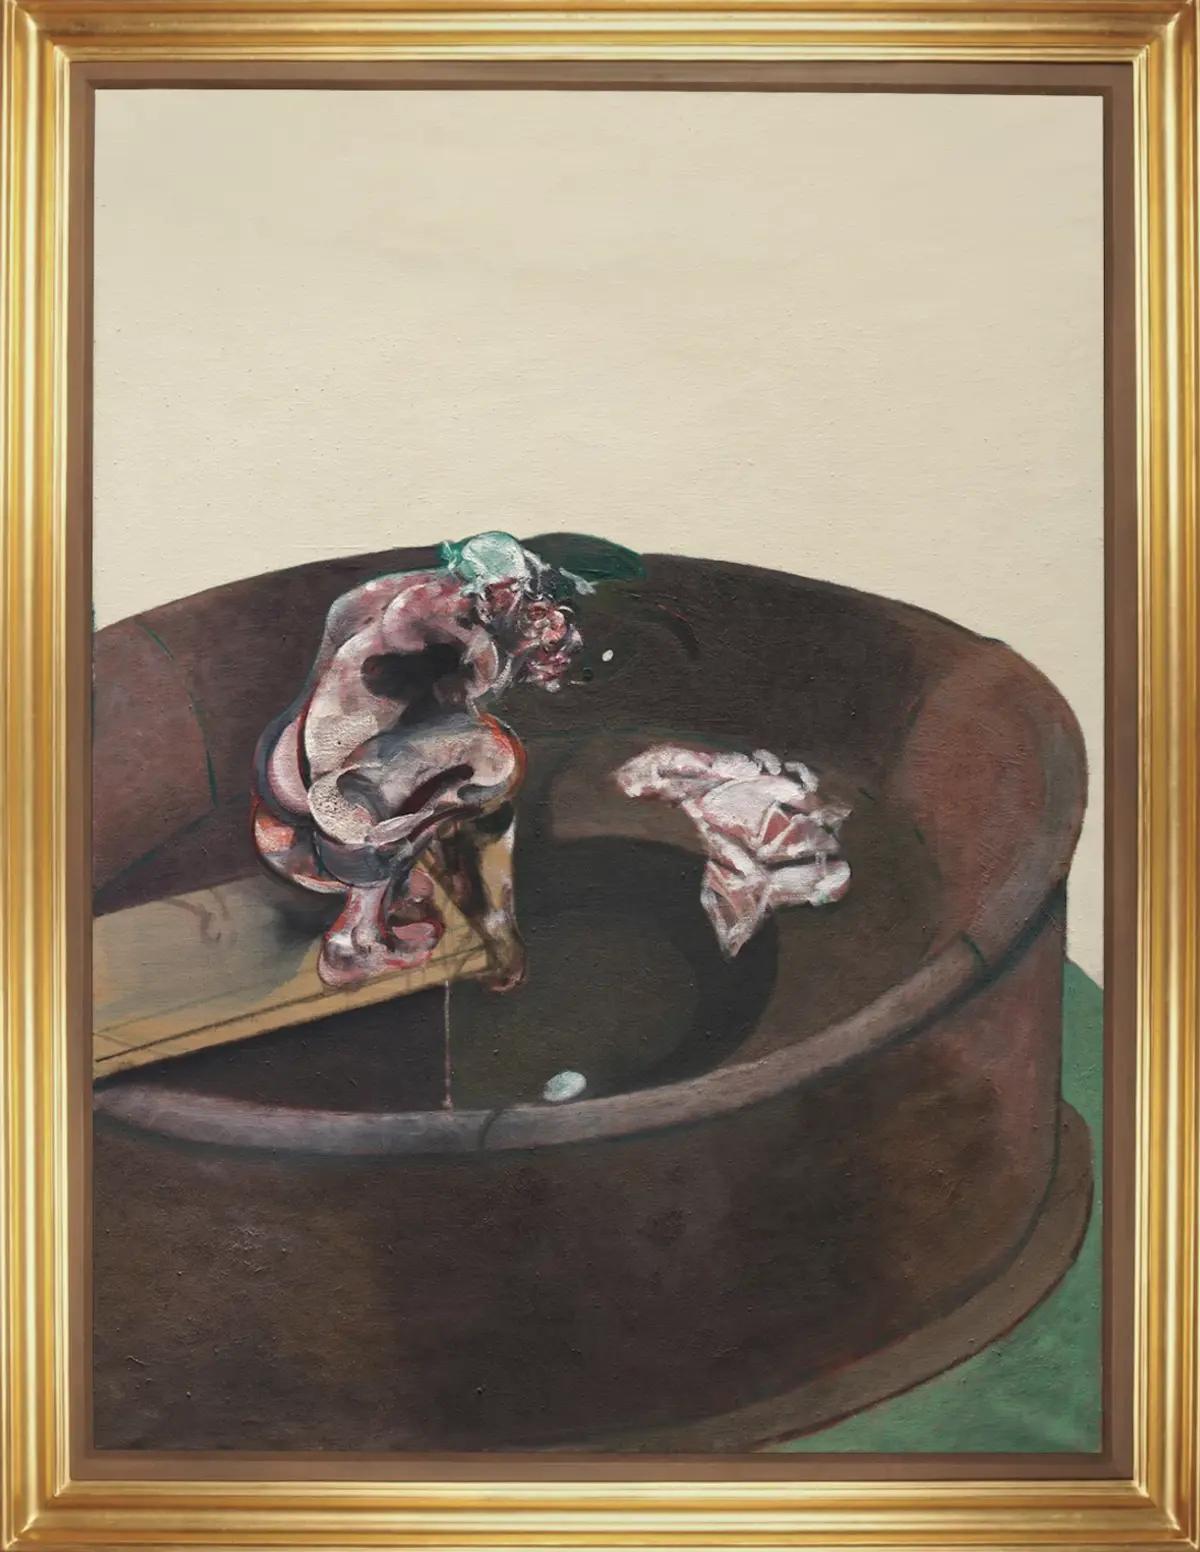 Francis Bacon, Portrait of George Dyer Crouching (1966). Courtesy de Sotheby's